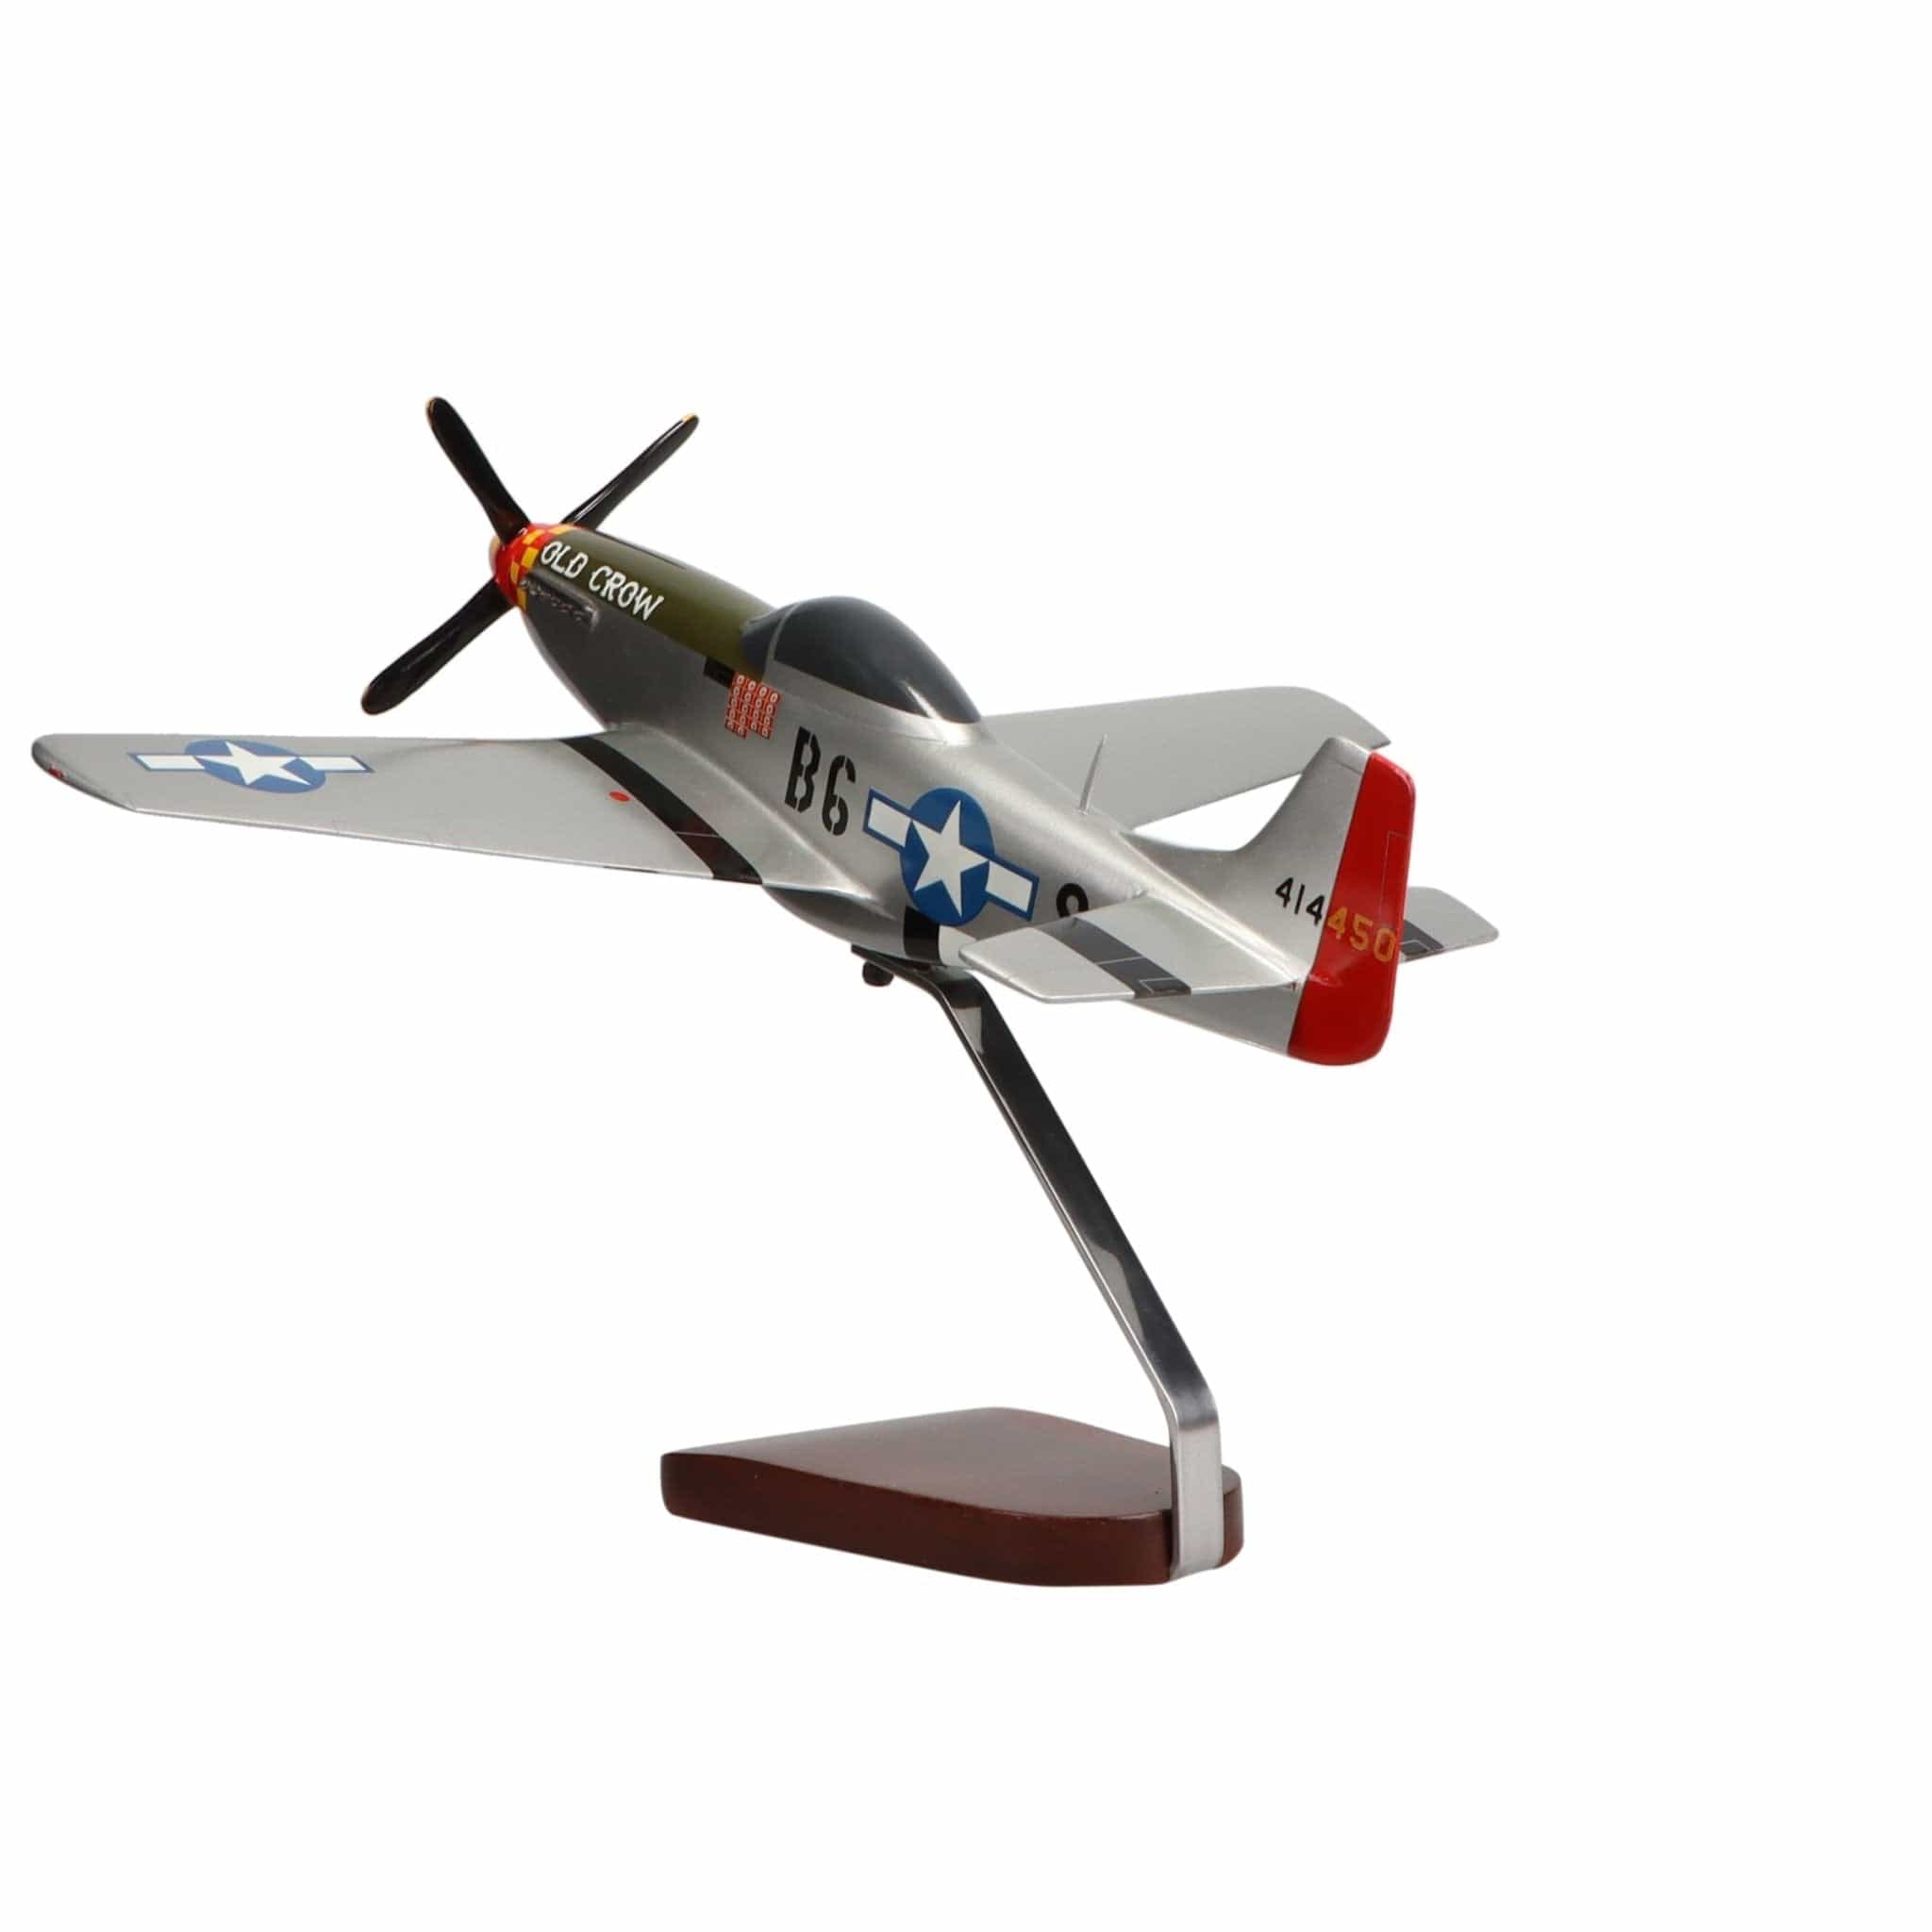 North American P-51D Mustang "Old Crow" Limited Edition Large Mahogany Model - PilotMall.com